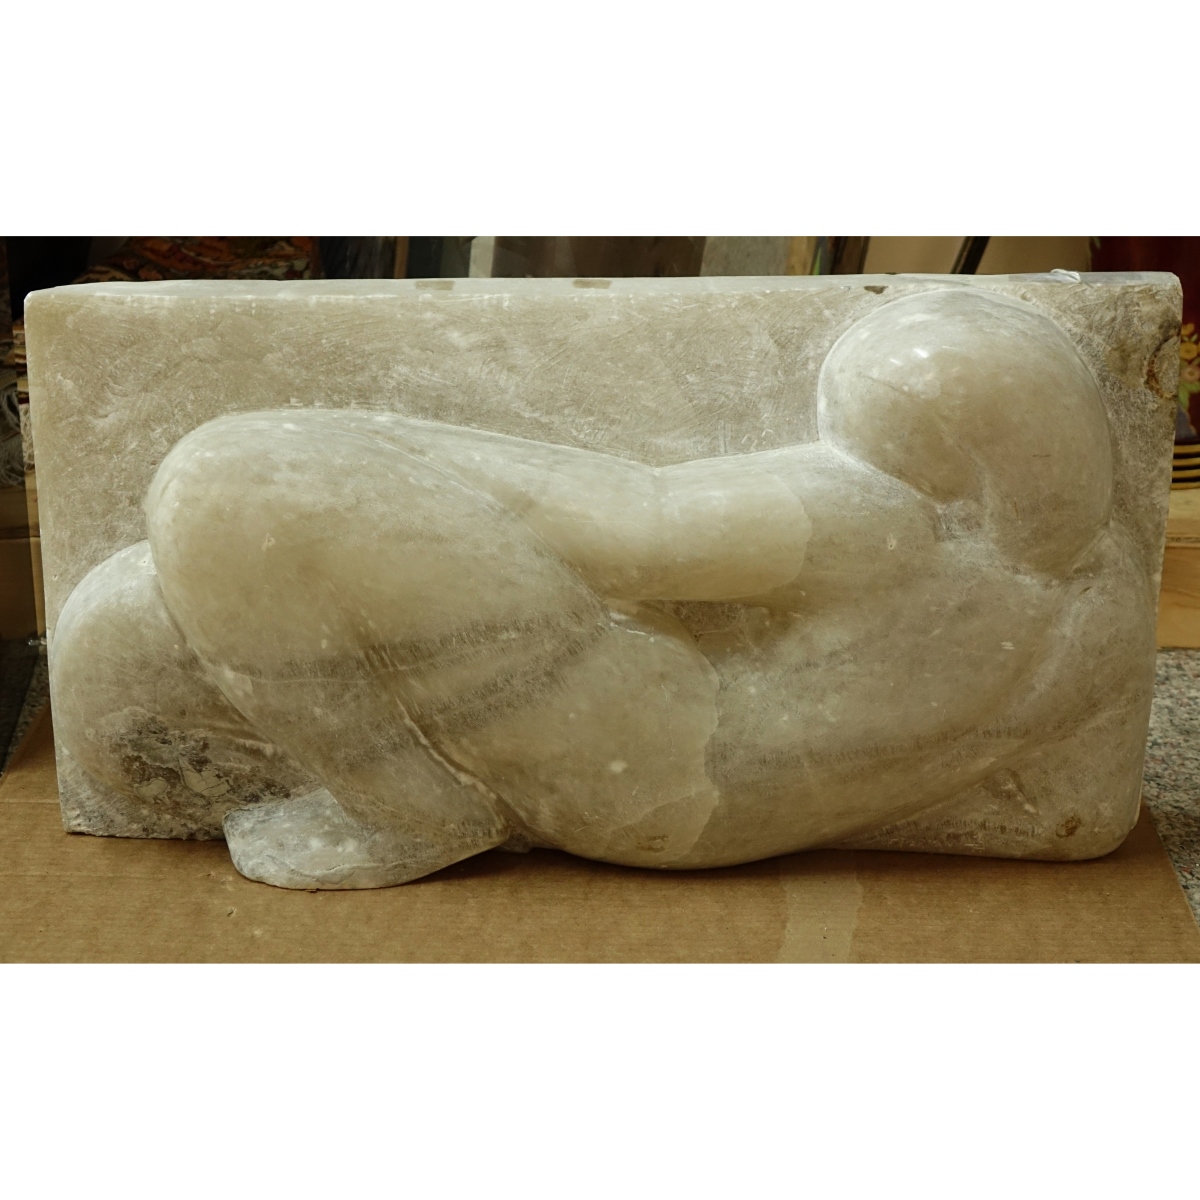 20th Century French Alabaster Relief Sculpture